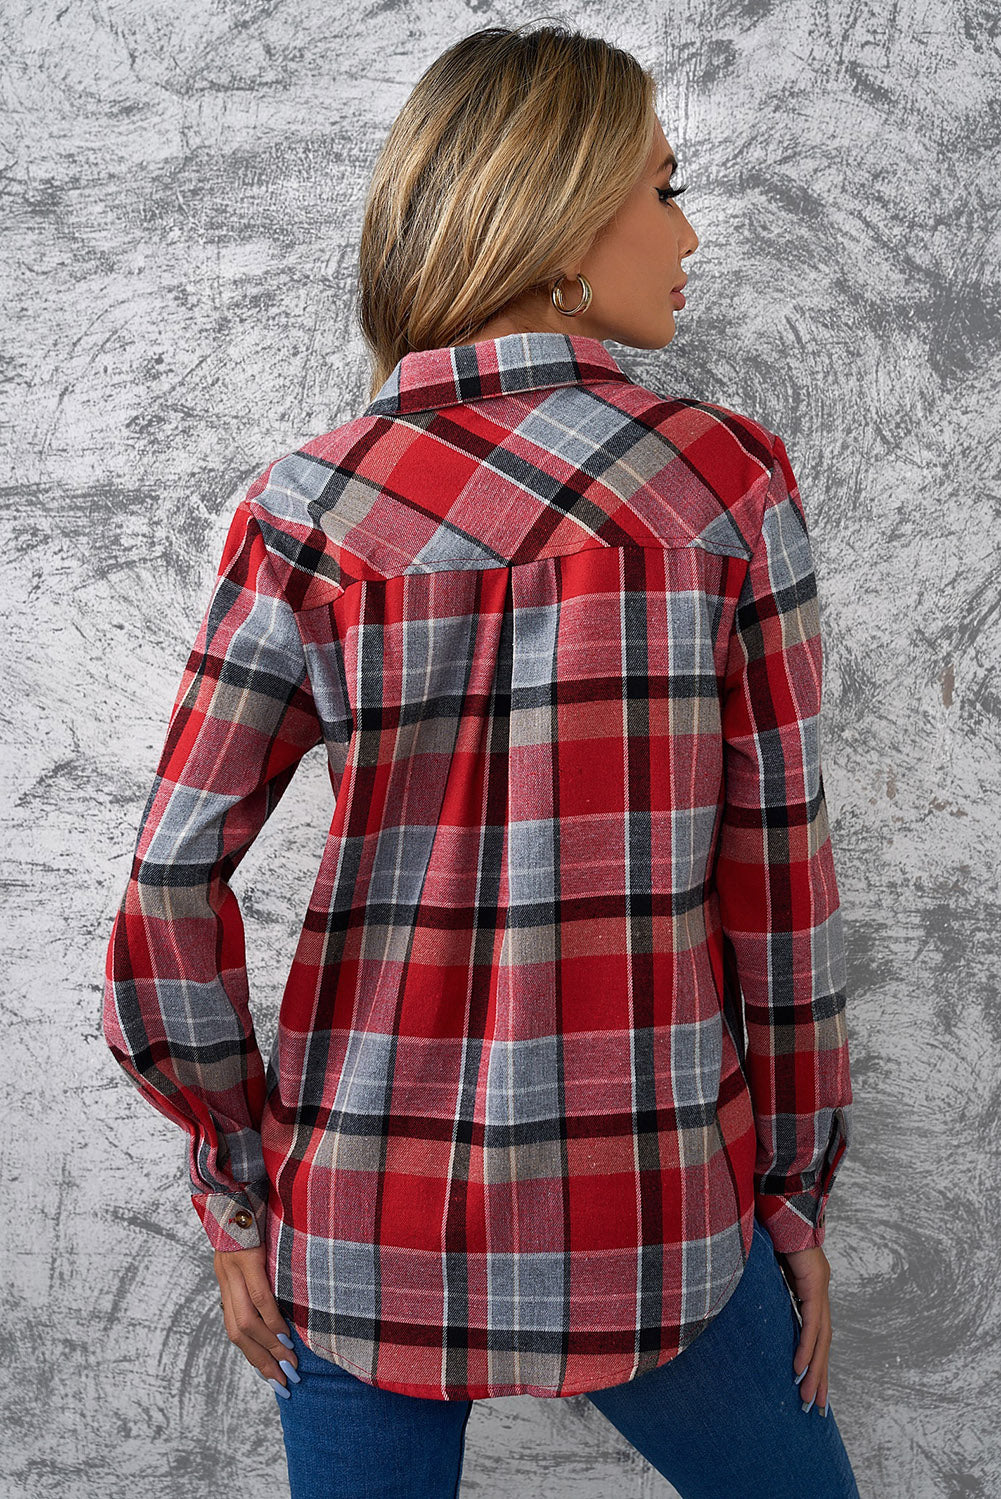 Back View, Plaid Button Front Curved Hem Collared Shirt